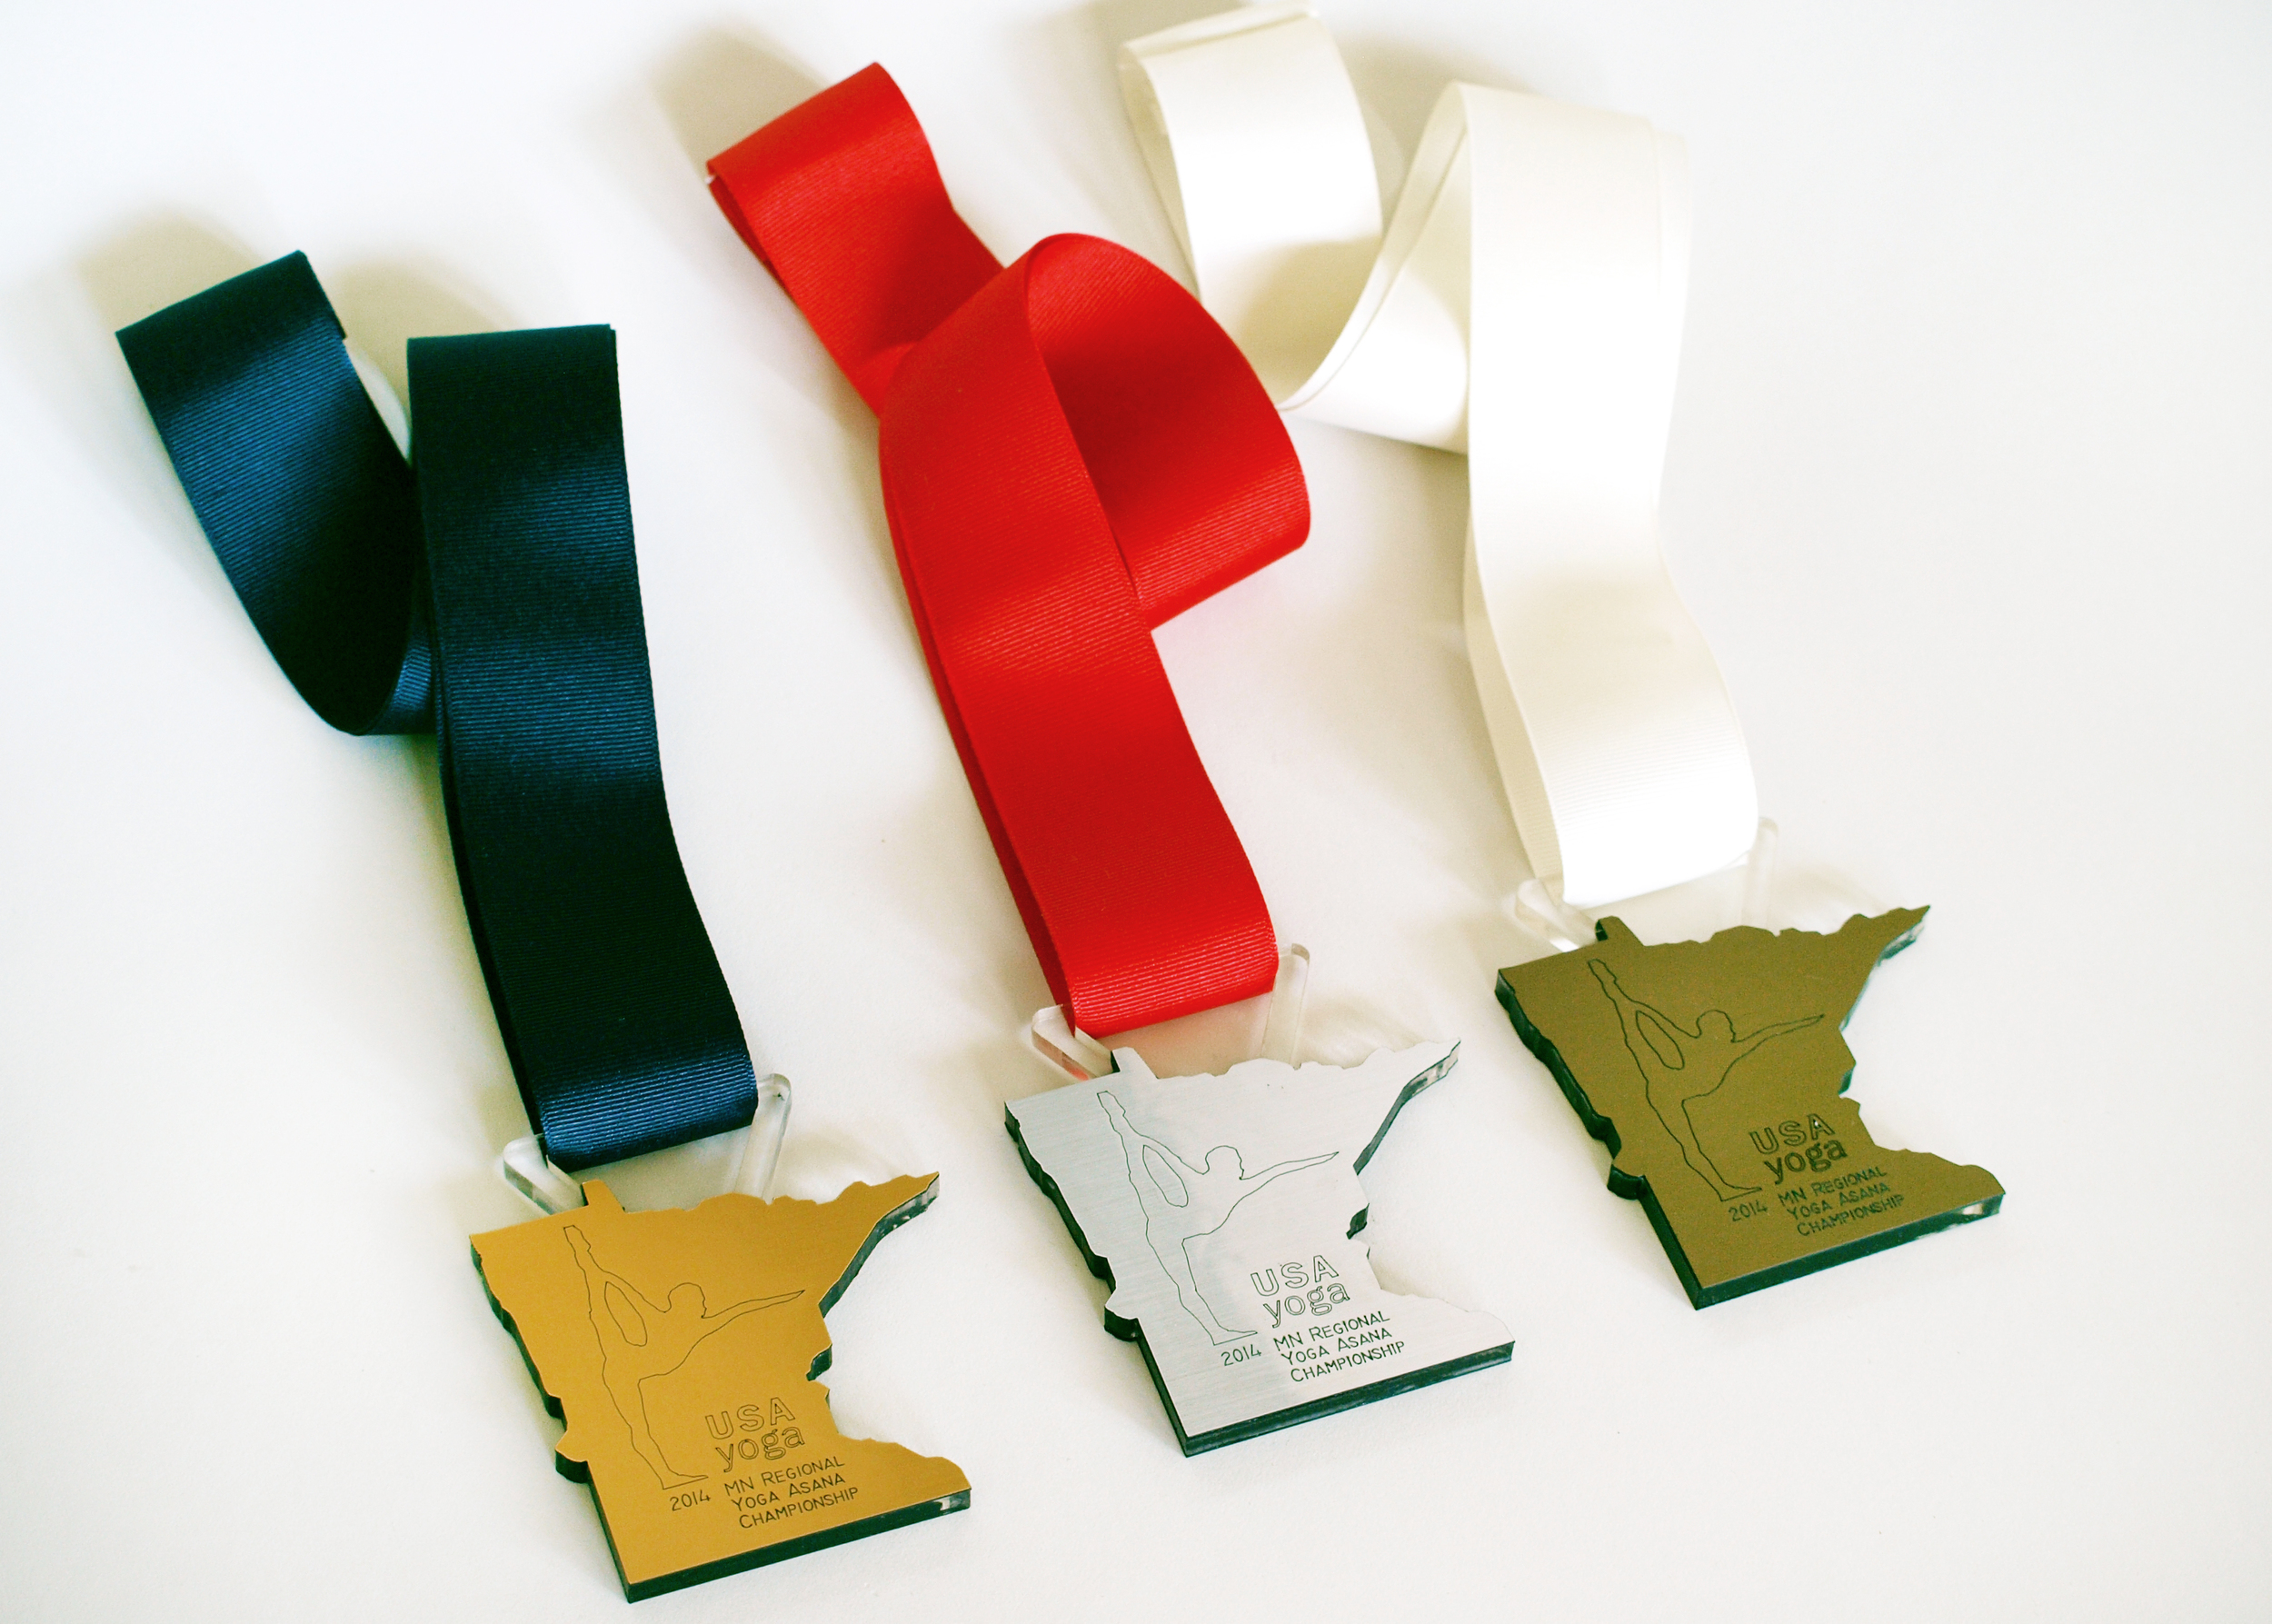 2014 YOGA MEDALS_cropped.jpg